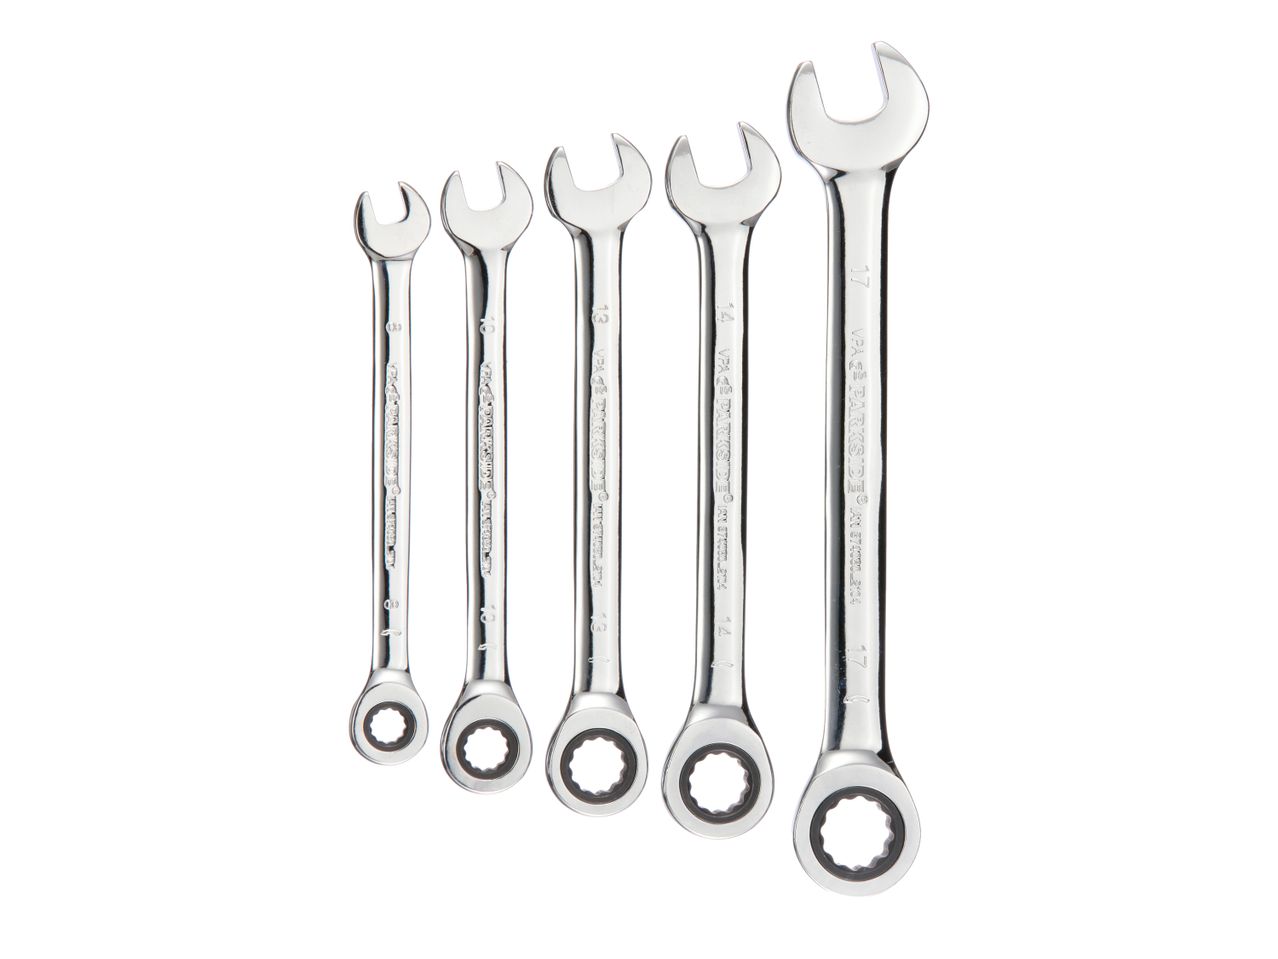 Go to full screen view: Ratchet Spanner Set - Image 1